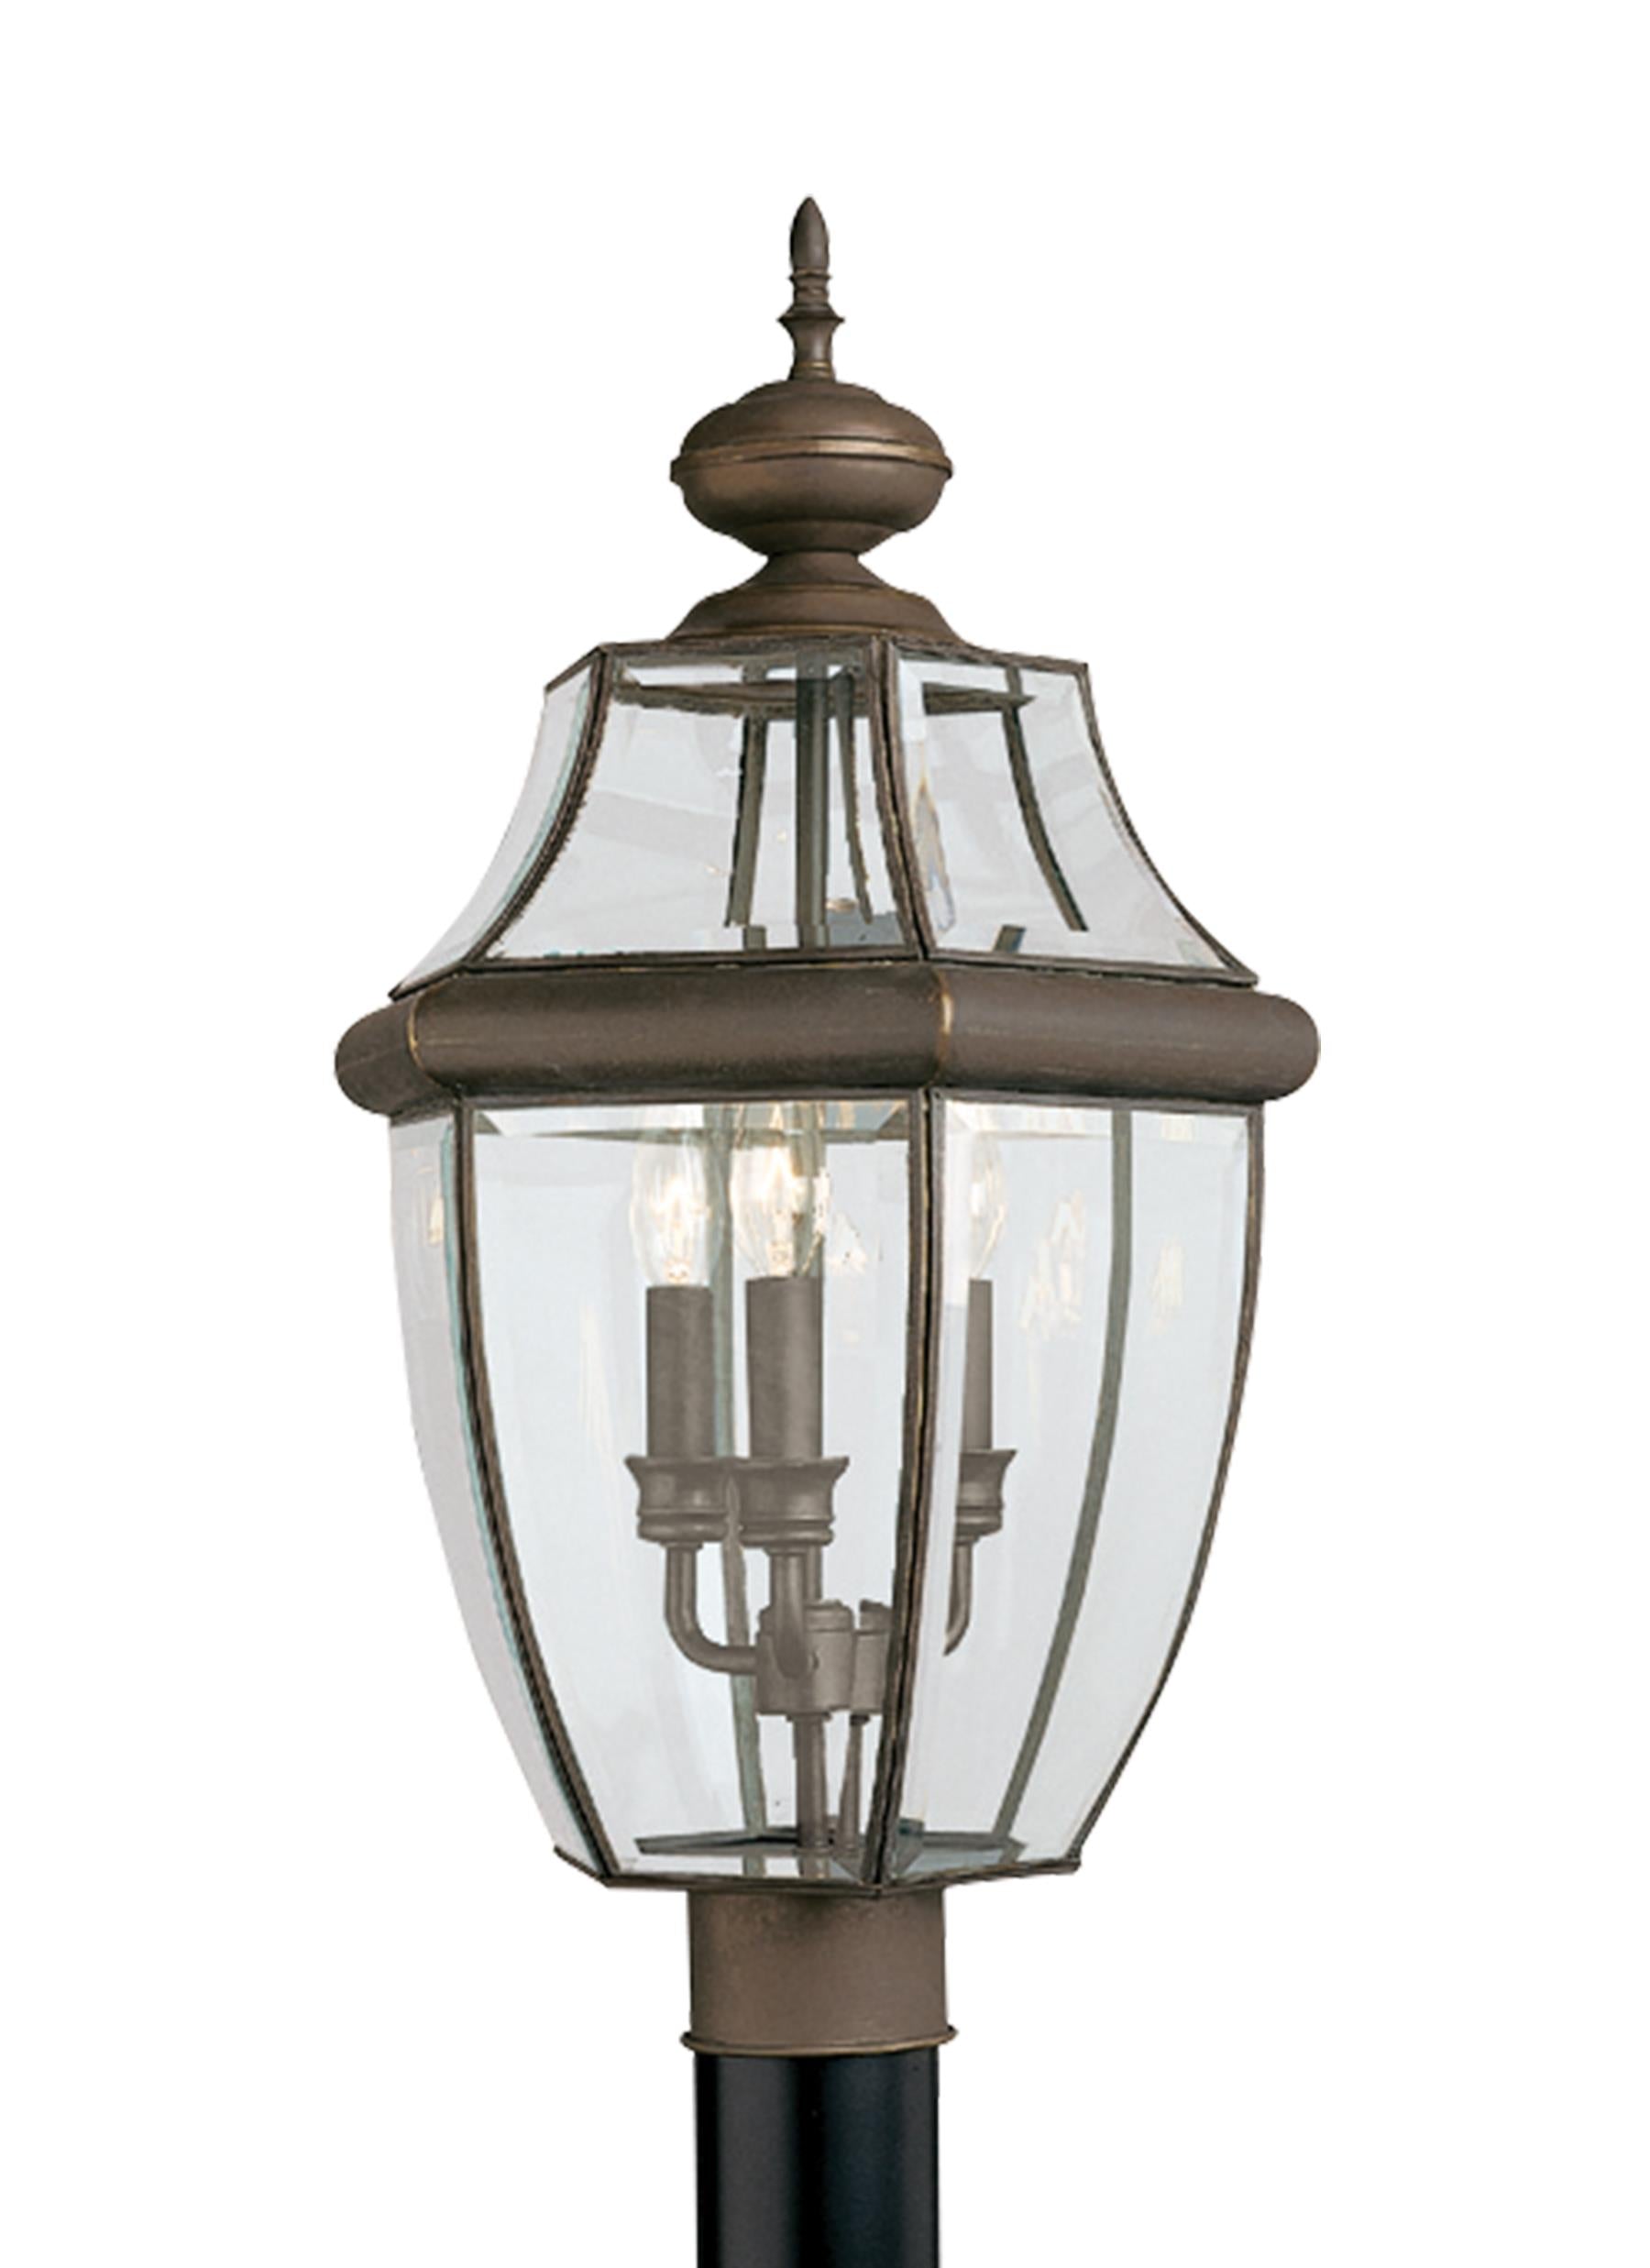 Lancaster traditional 3-light outdoor exterior post lantern in antique bronze finish with clear curved beveled glass shade